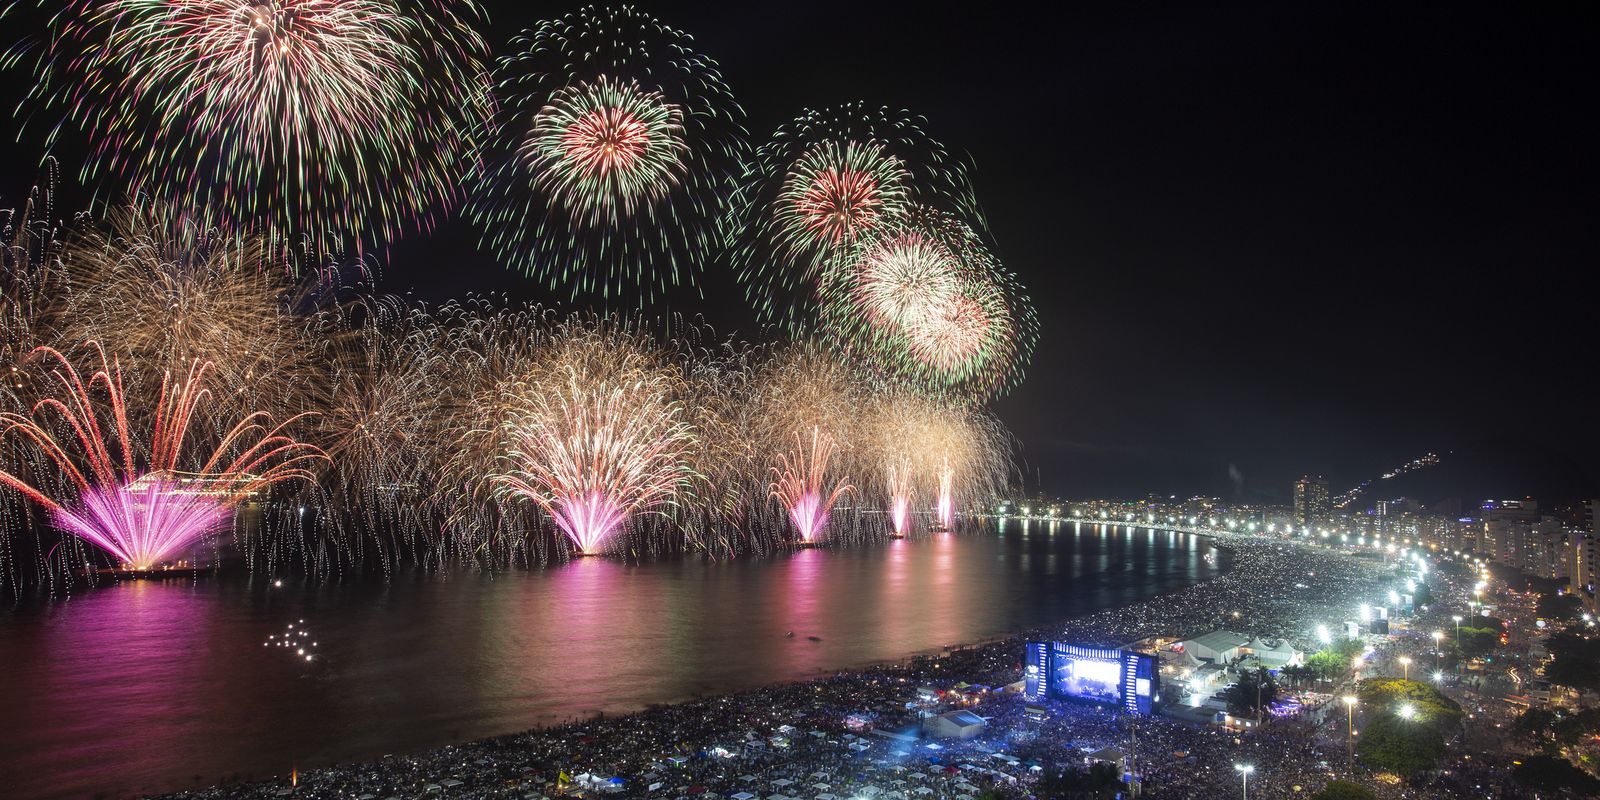 Covid-19: New Year's Eve events still to be defined in the state of Rio